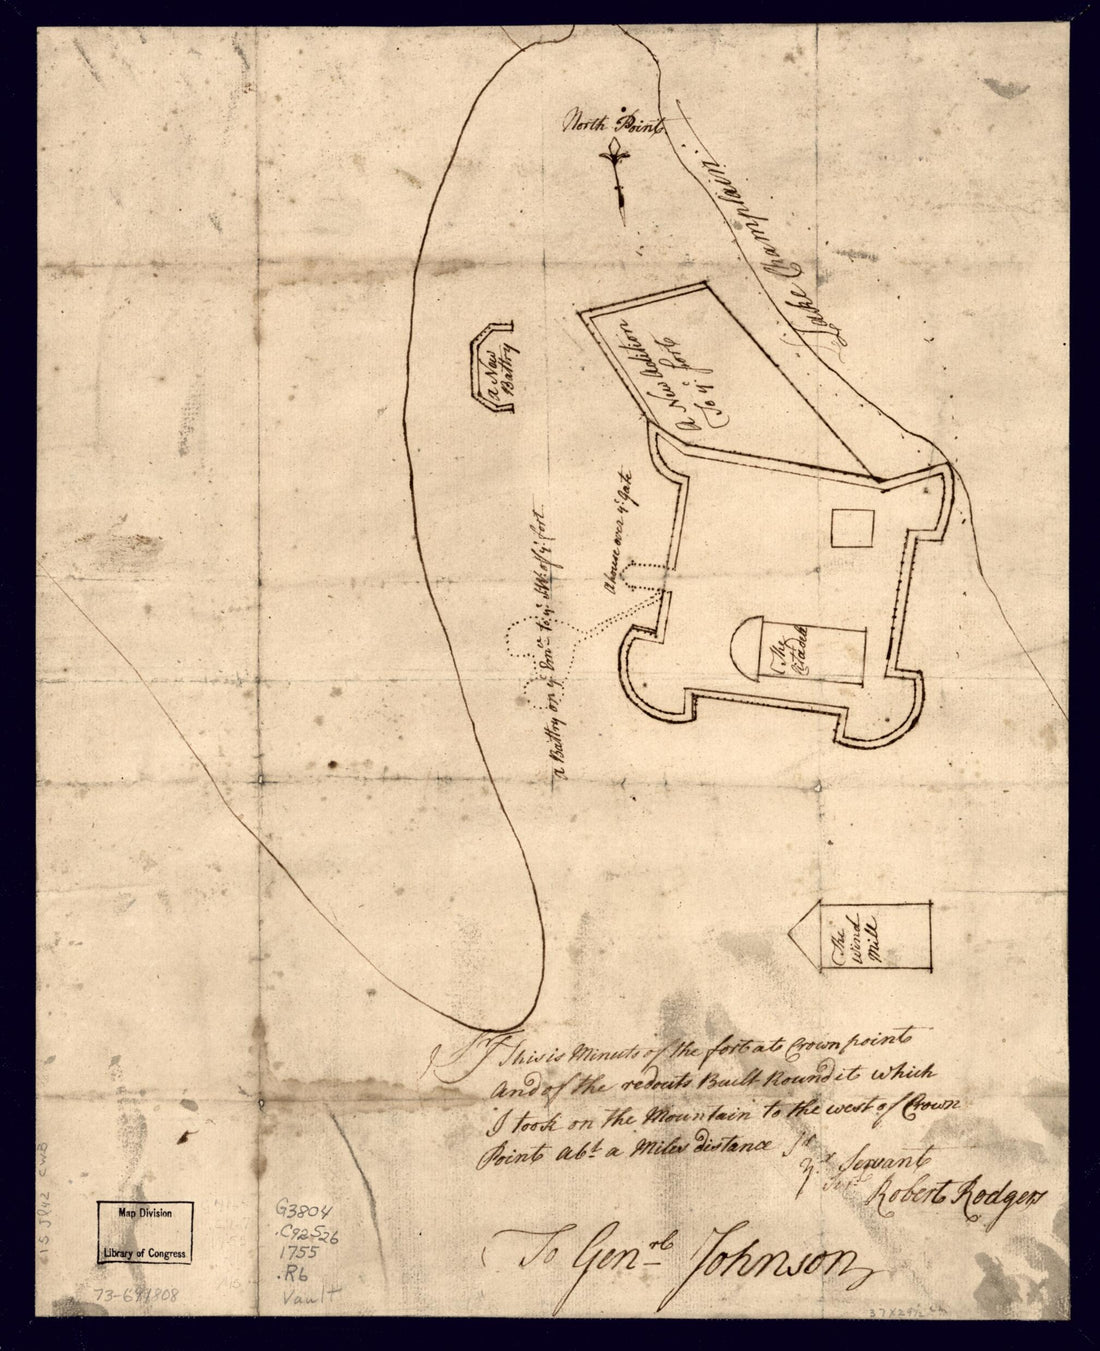 This old map of Sir: This Is Minuts of the Fort at Crown Point and of the Redouts Built Round It; Which I Took On the Mountain to the West of Crown Point Abt. a Miles Distance from 1755 was created by William Johnson, Robert Rogers in 1755